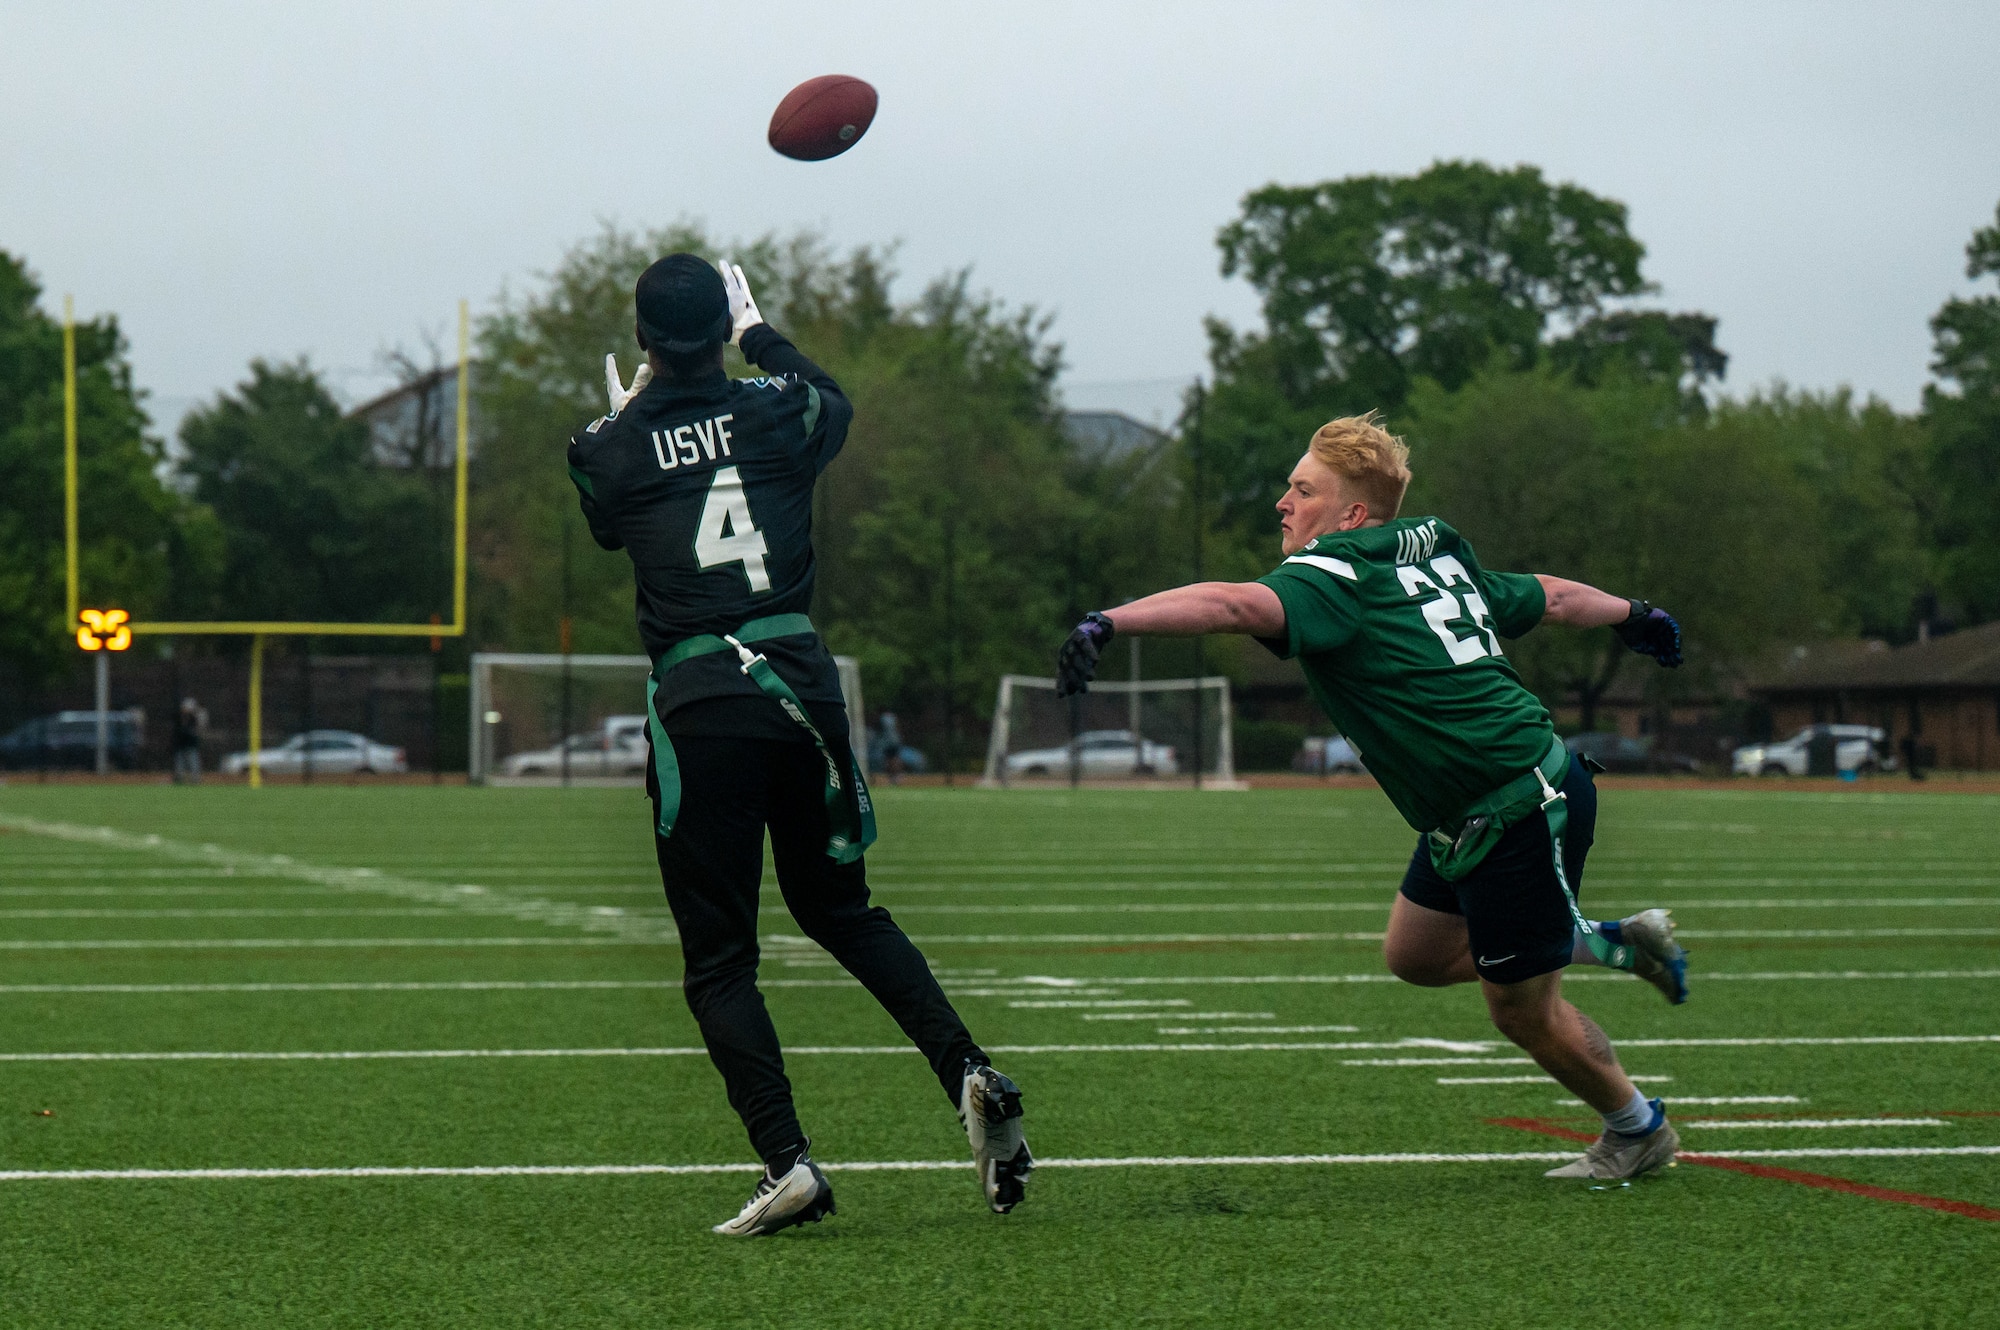 U.S. Senior Airman Joshua Hartman, assigned to the 48th Security Forces Squadron, catches a pass during a flag football game against a U.K. Armed Forces team at Royal Air Force Lakenheath, England, May 12, 2023. The flag football game, hosted by the New York Jets and the Armed Forces Flag Football Association, was intended to foster an environment where both teams could participate in a shared activity to promote teamwork, communication and mutual respect. (U.S. Air Force photo by Airman 1st Class Seleena Muhammad-Ali)